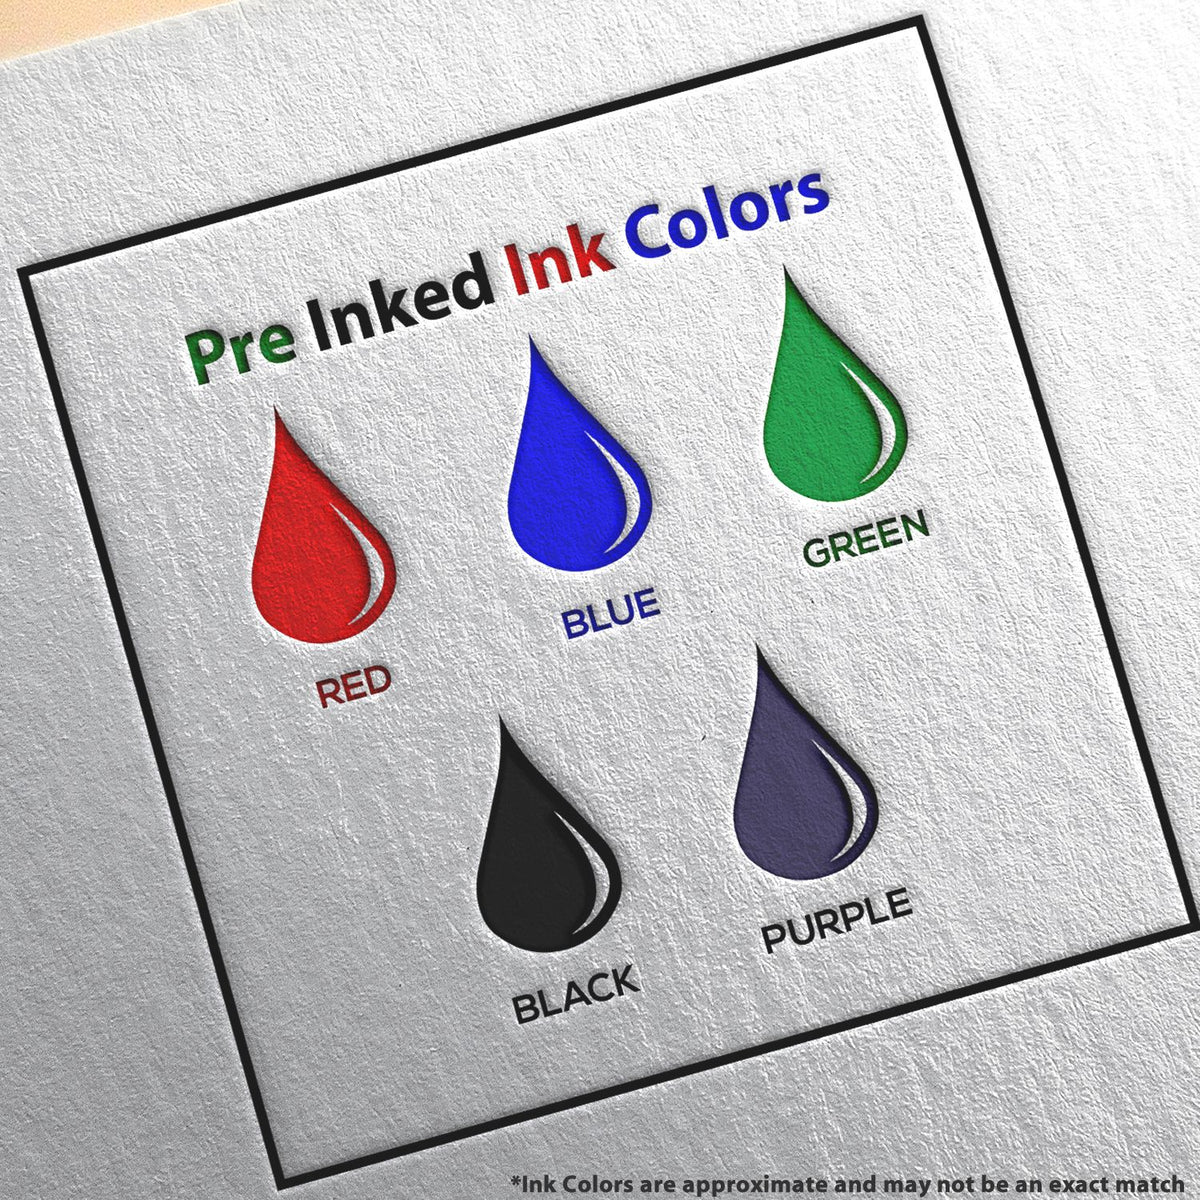 A picture showing the different ink colors or hues available for the Slim Pre-Inked Arizona Architect Seal Stamp product.